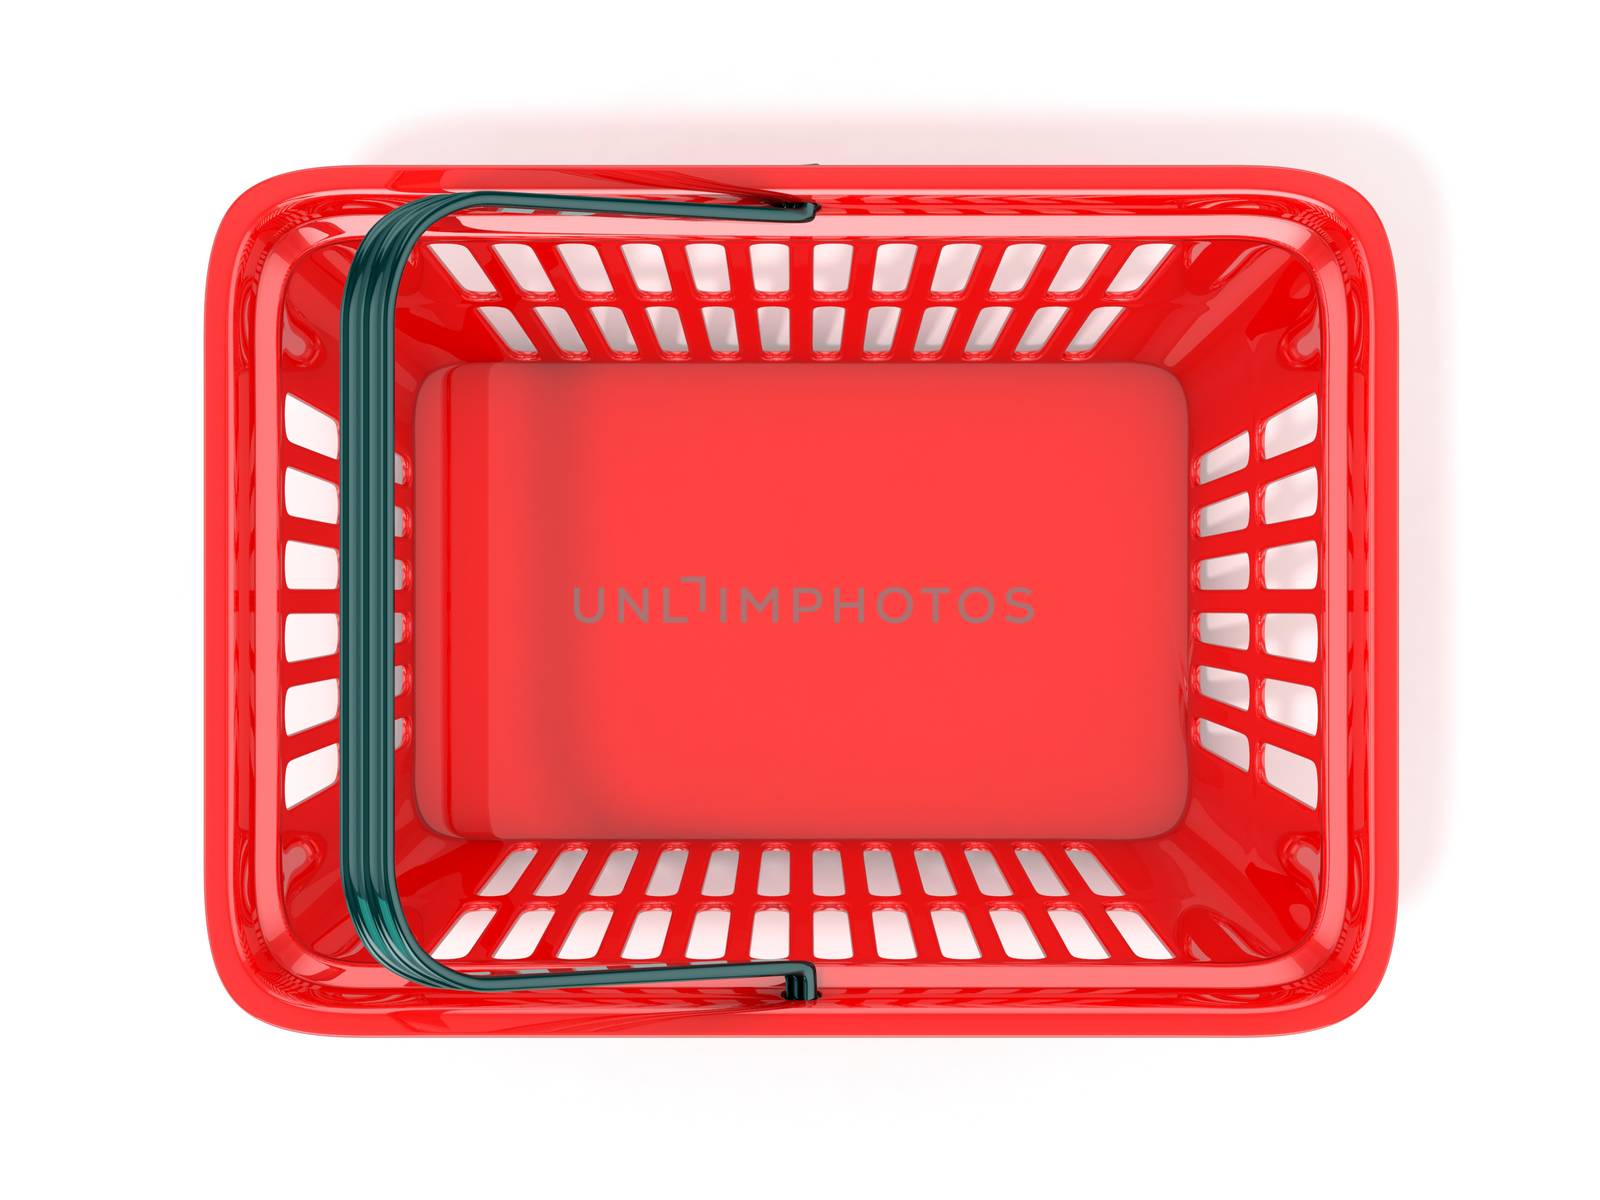 Red shopping basket, top view. 3D rendered illustration